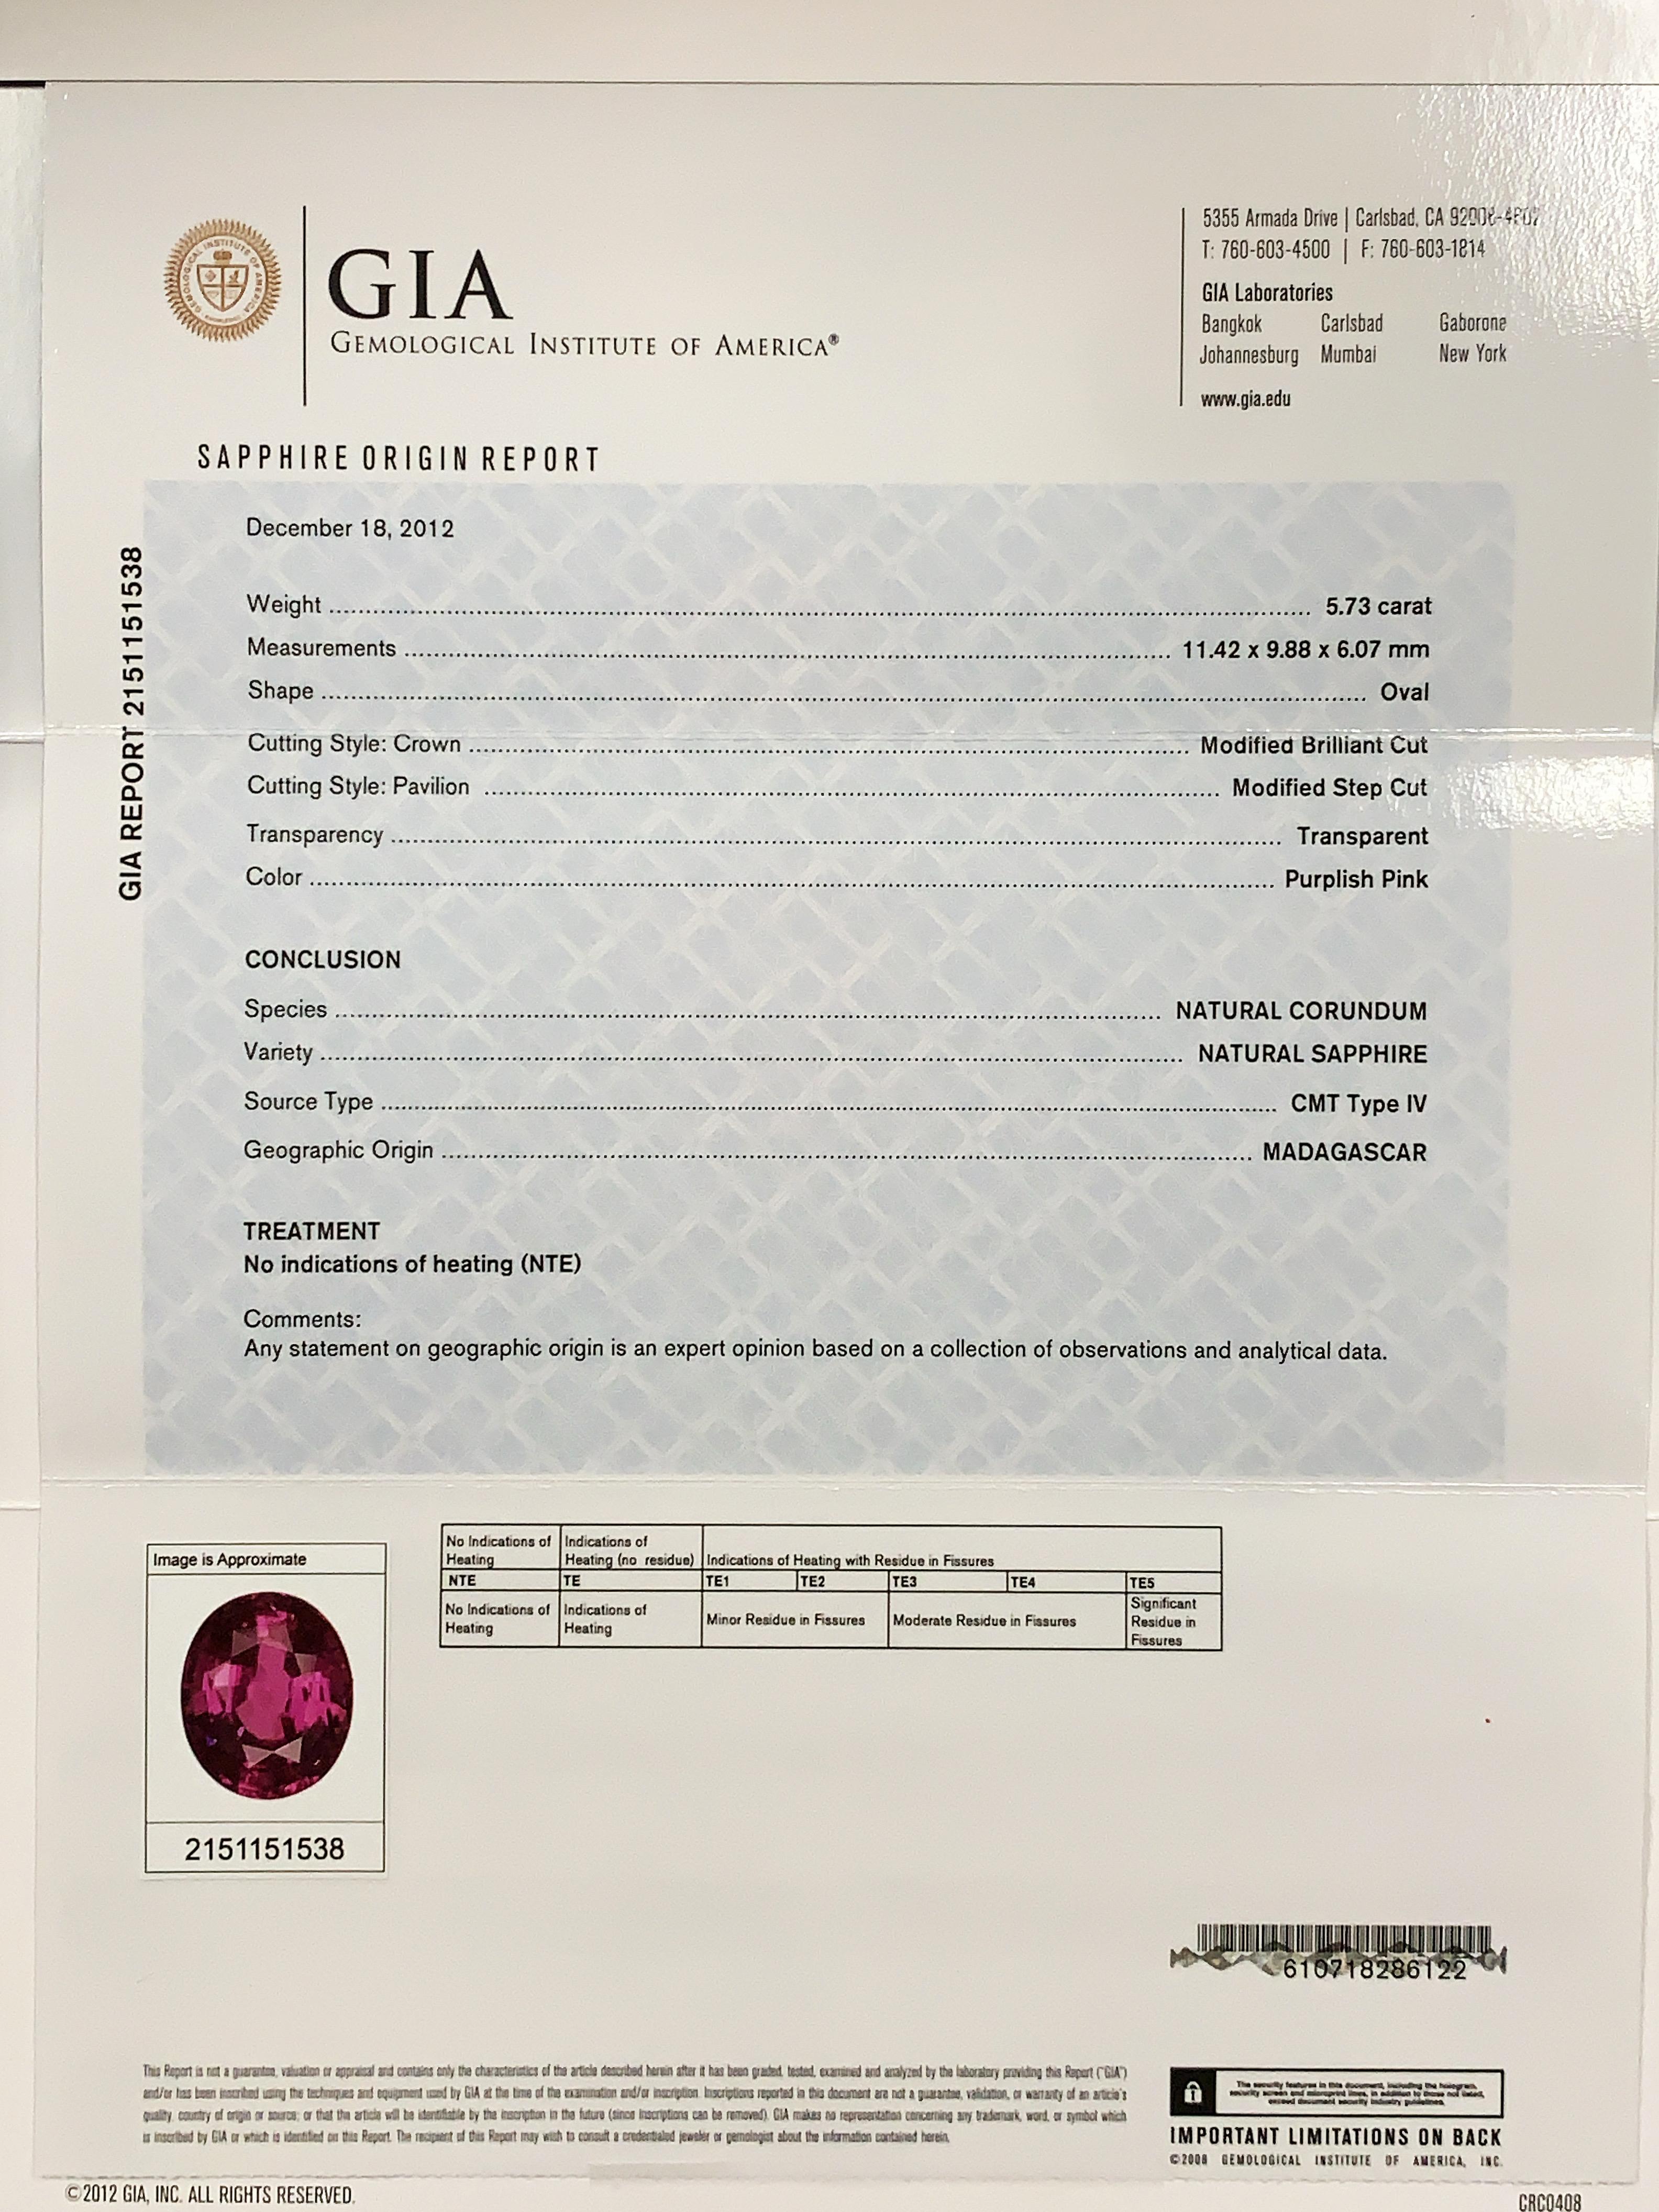 This dazzling cocktail ring features a spectacular pink sapphire with all the pedigrees one could ask for in a fine collector gemstone! Accompanied by a Gemological Institute of America (GIA) Origin Report, this pink sapphire is certified unheated,